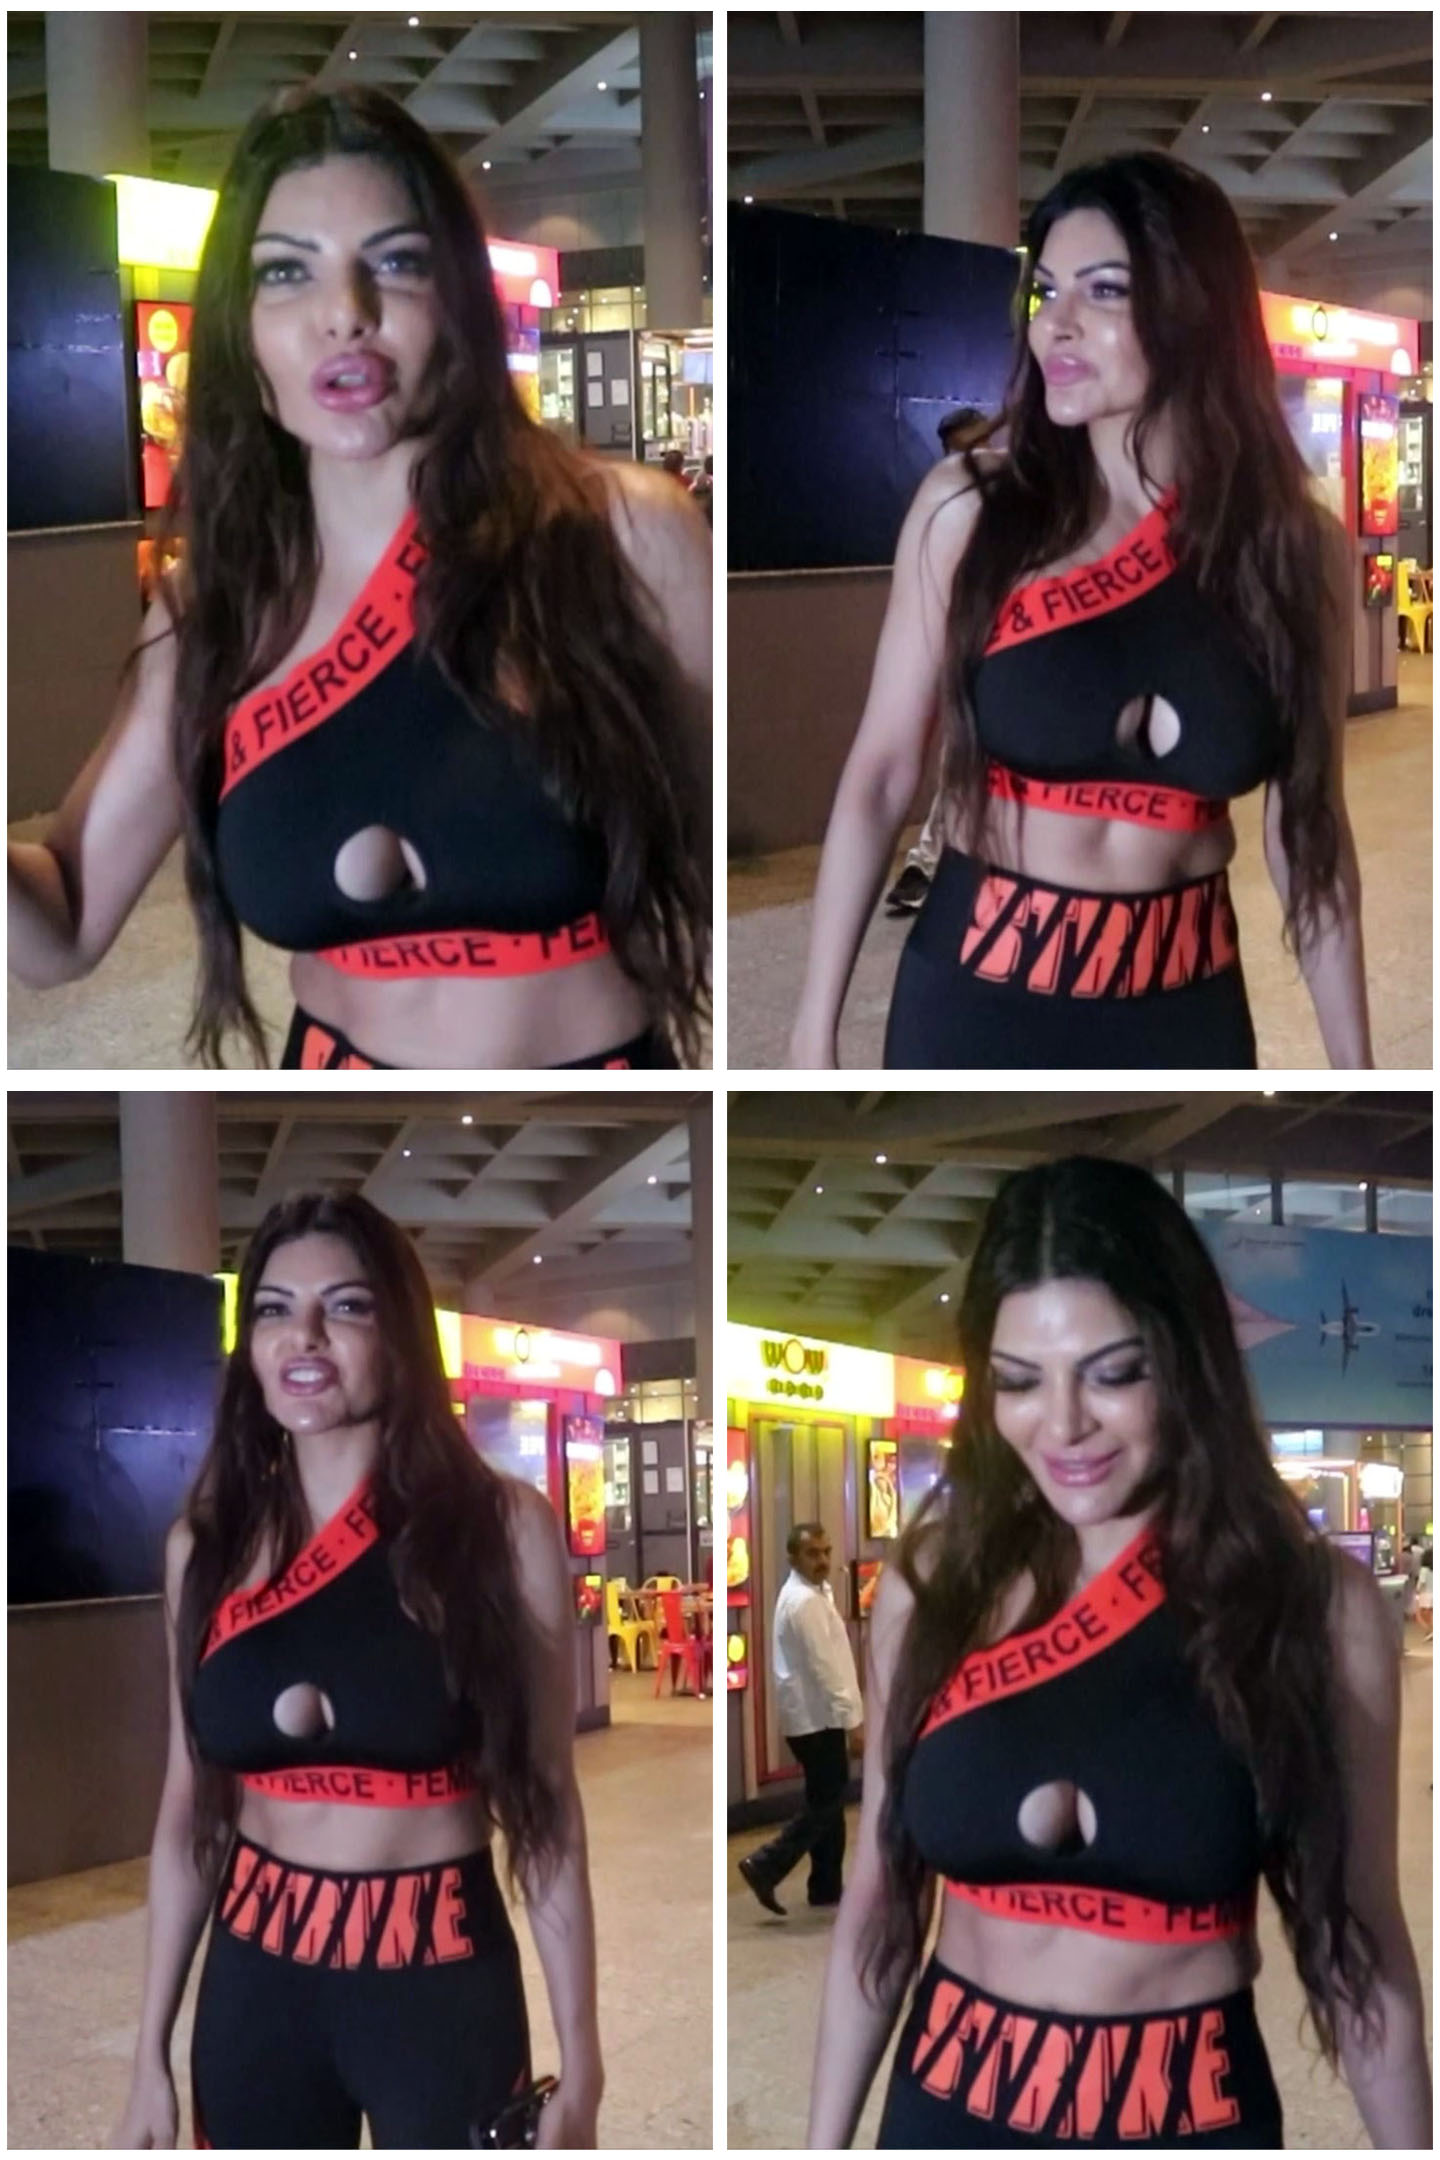 Sherlyn Chopra promoting her music video at the airport on 14 June 2023